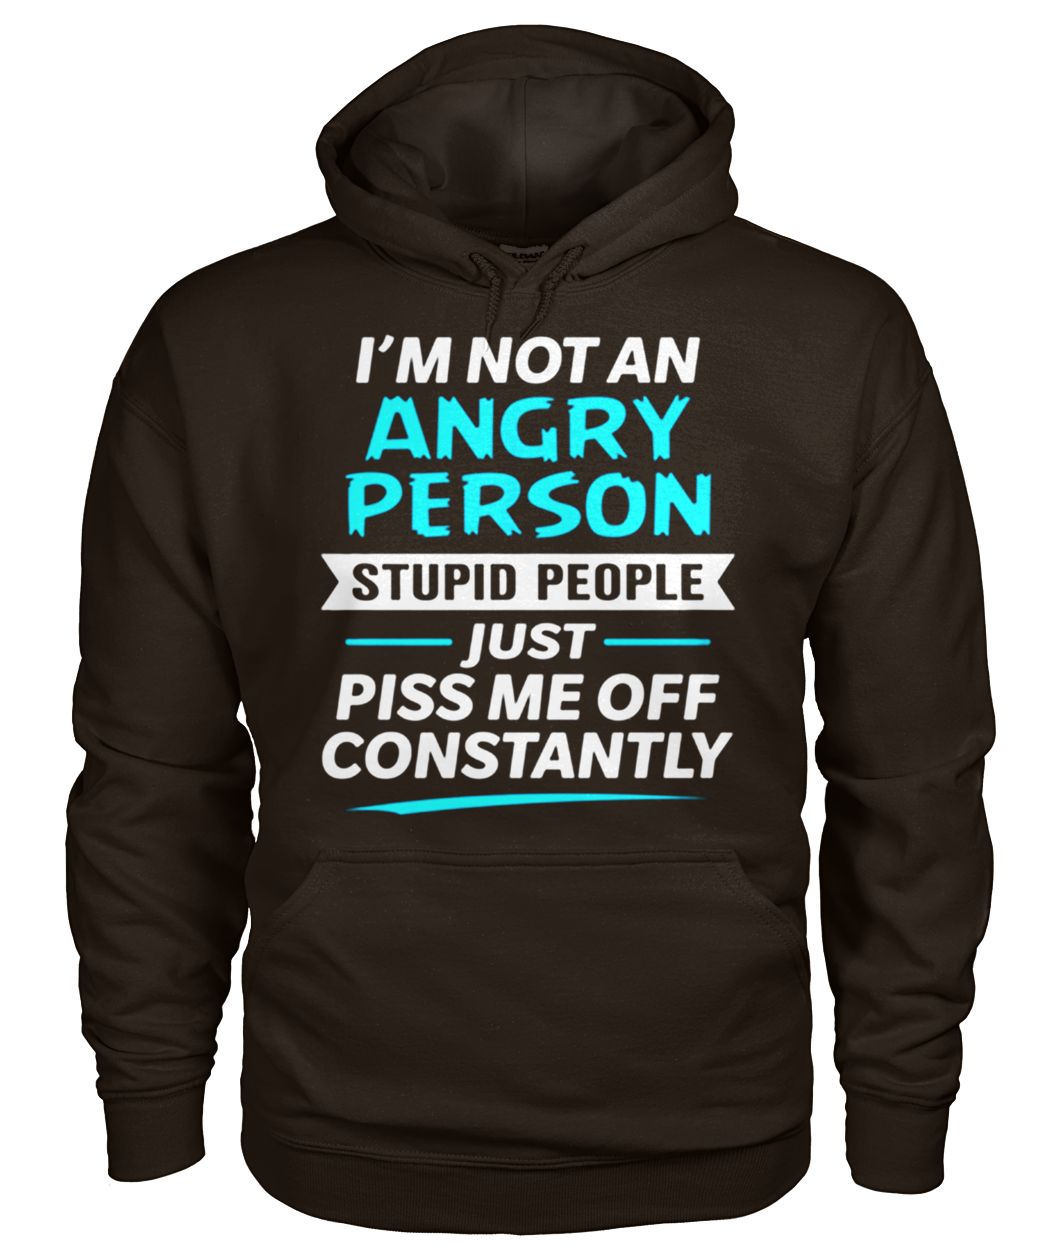 I'm not an angry person stupid people just piss me off constantly gildan hoodie